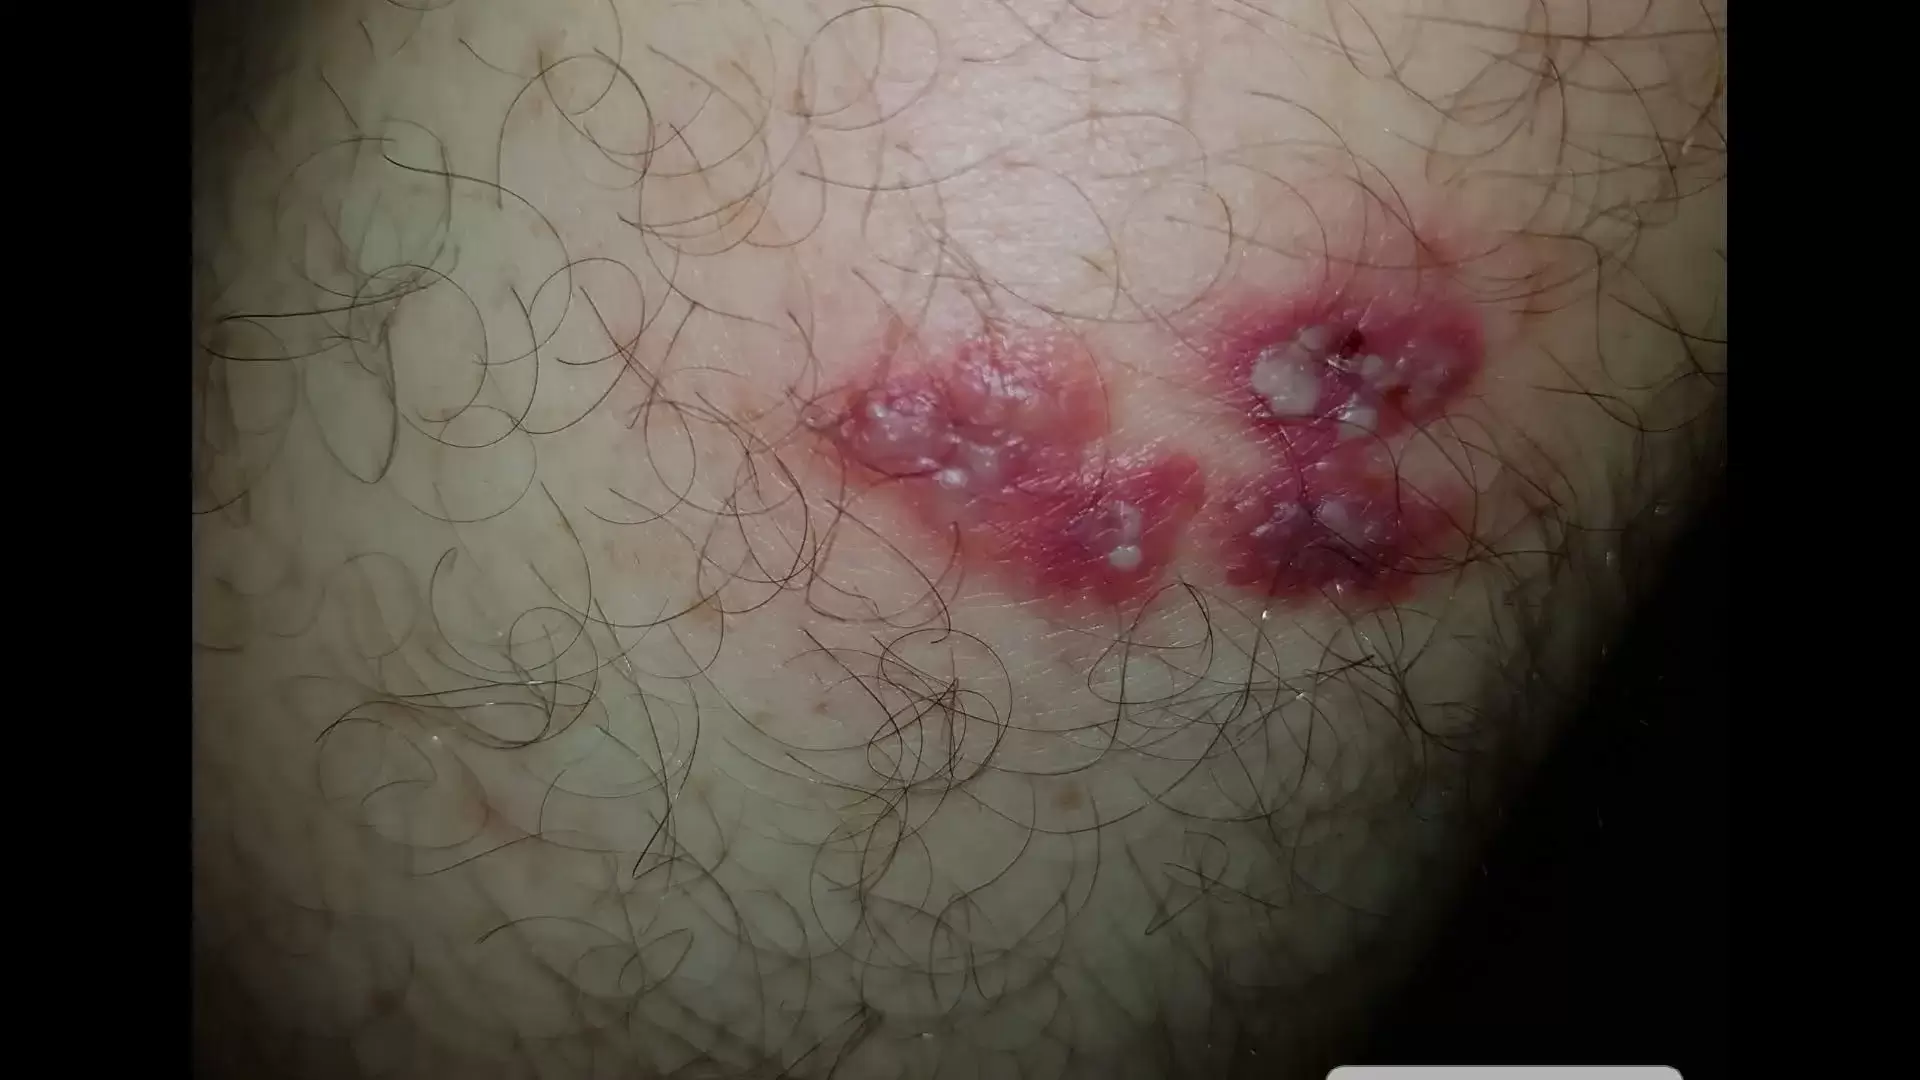 Herpes Zoster in my right leg.